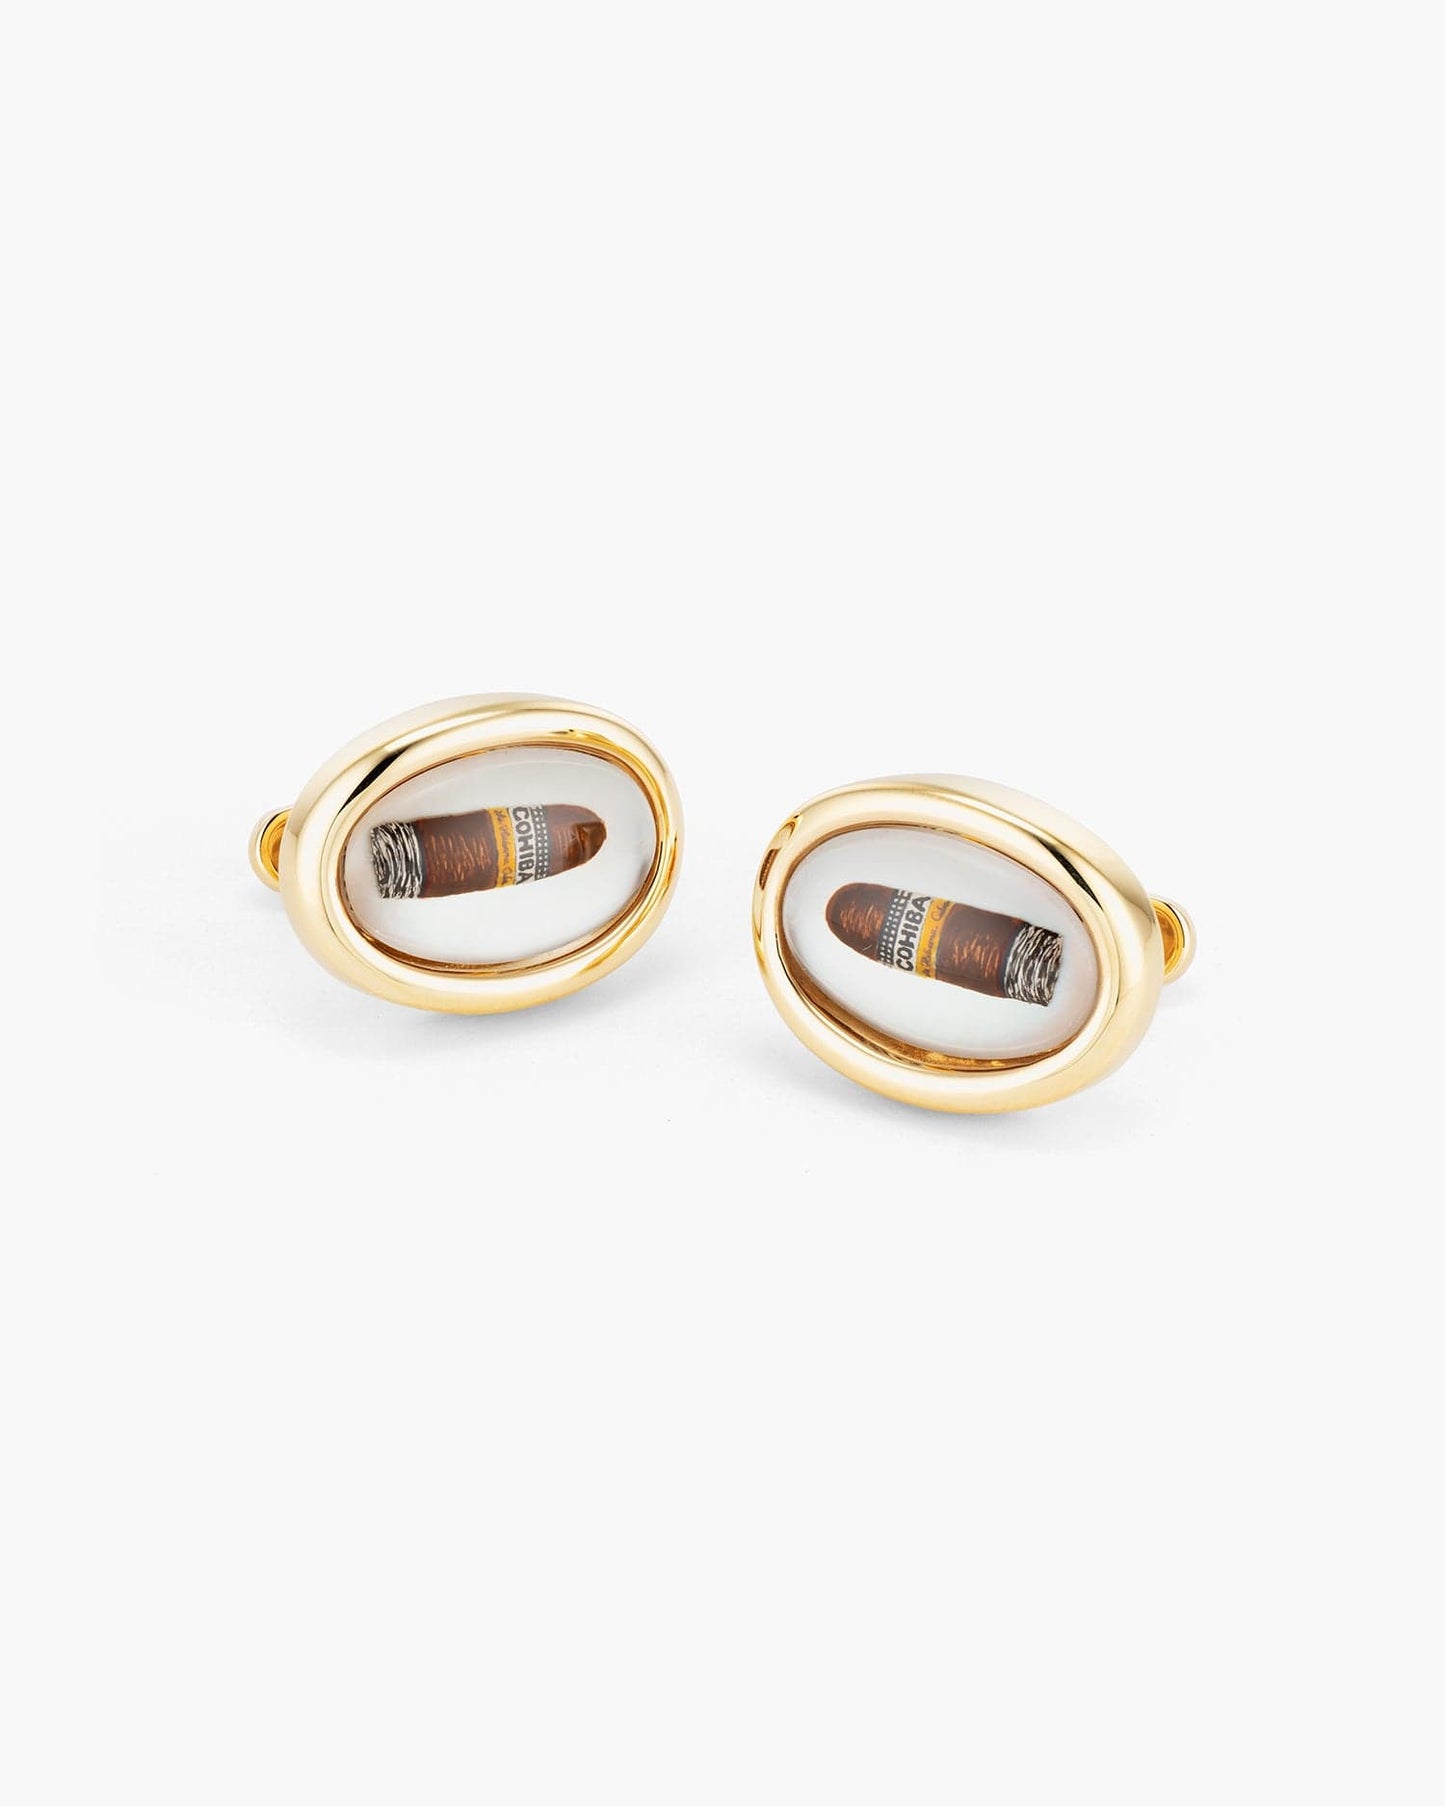 Mother of Pearl and Crystal Hand Painted Cigar Cufflinks